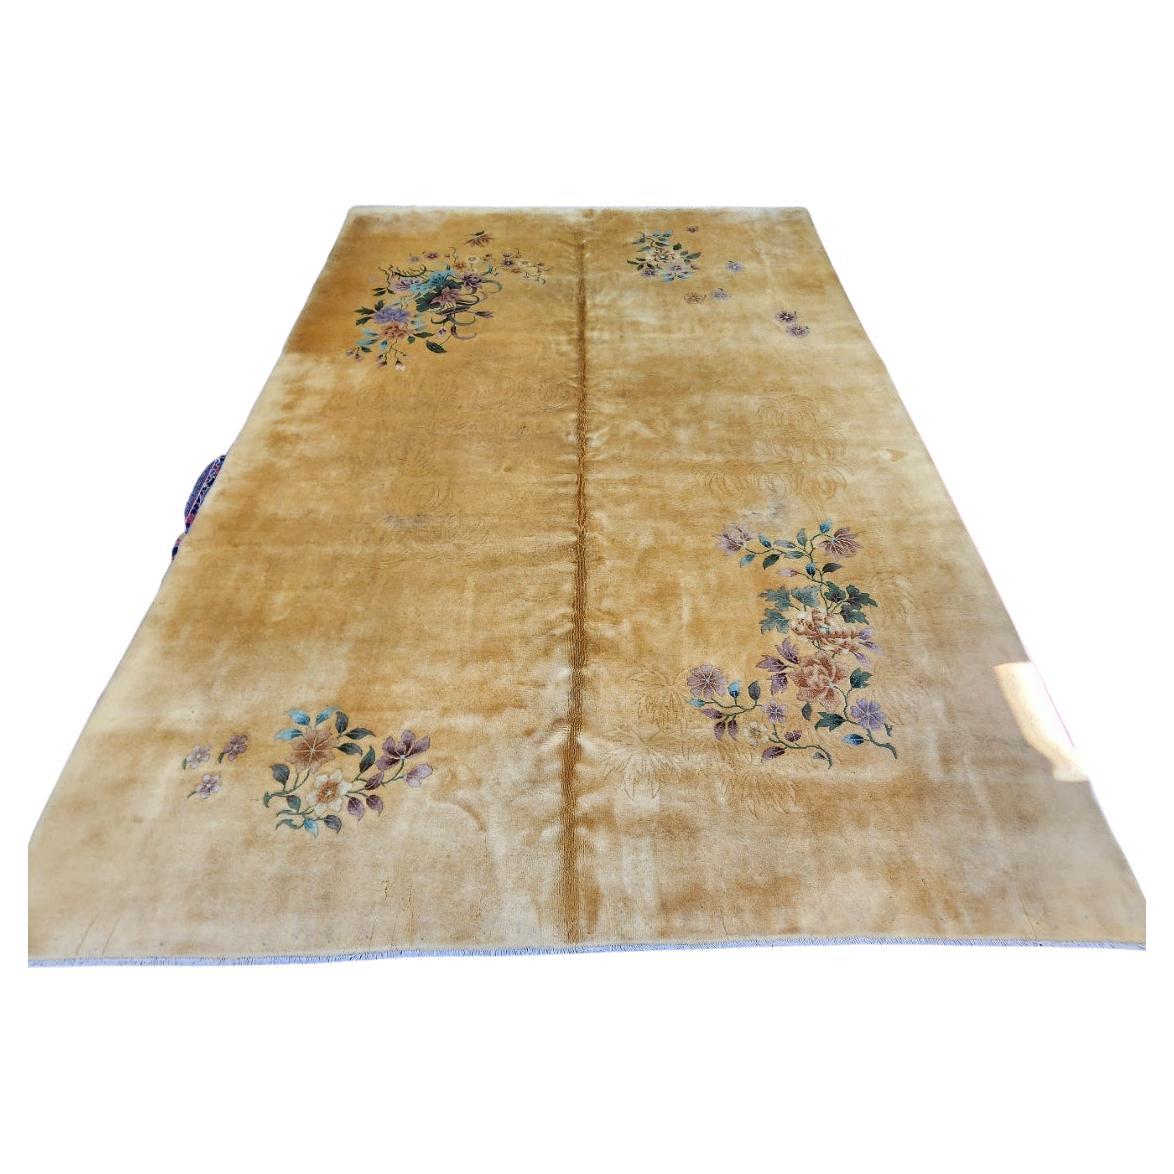 Early 20th Century Chinese Nichols Art Deco Rug circa 1920 Mint Condition 9x12 For Sale